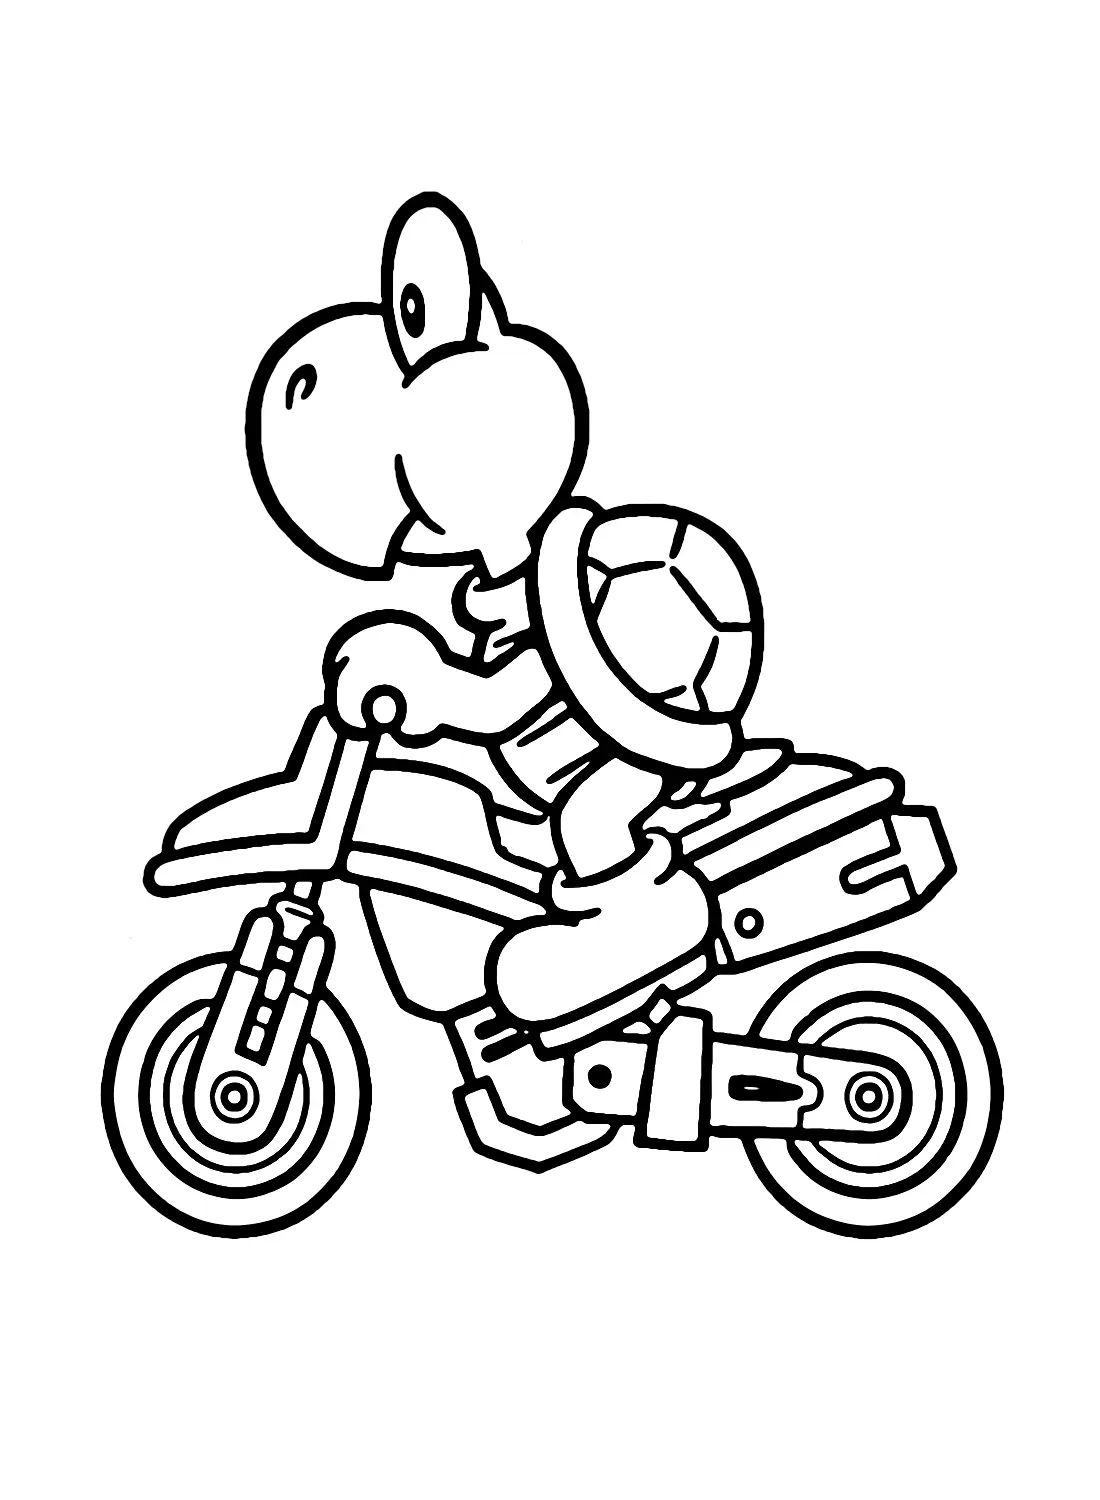 Koopa Troopa Coloring Pages